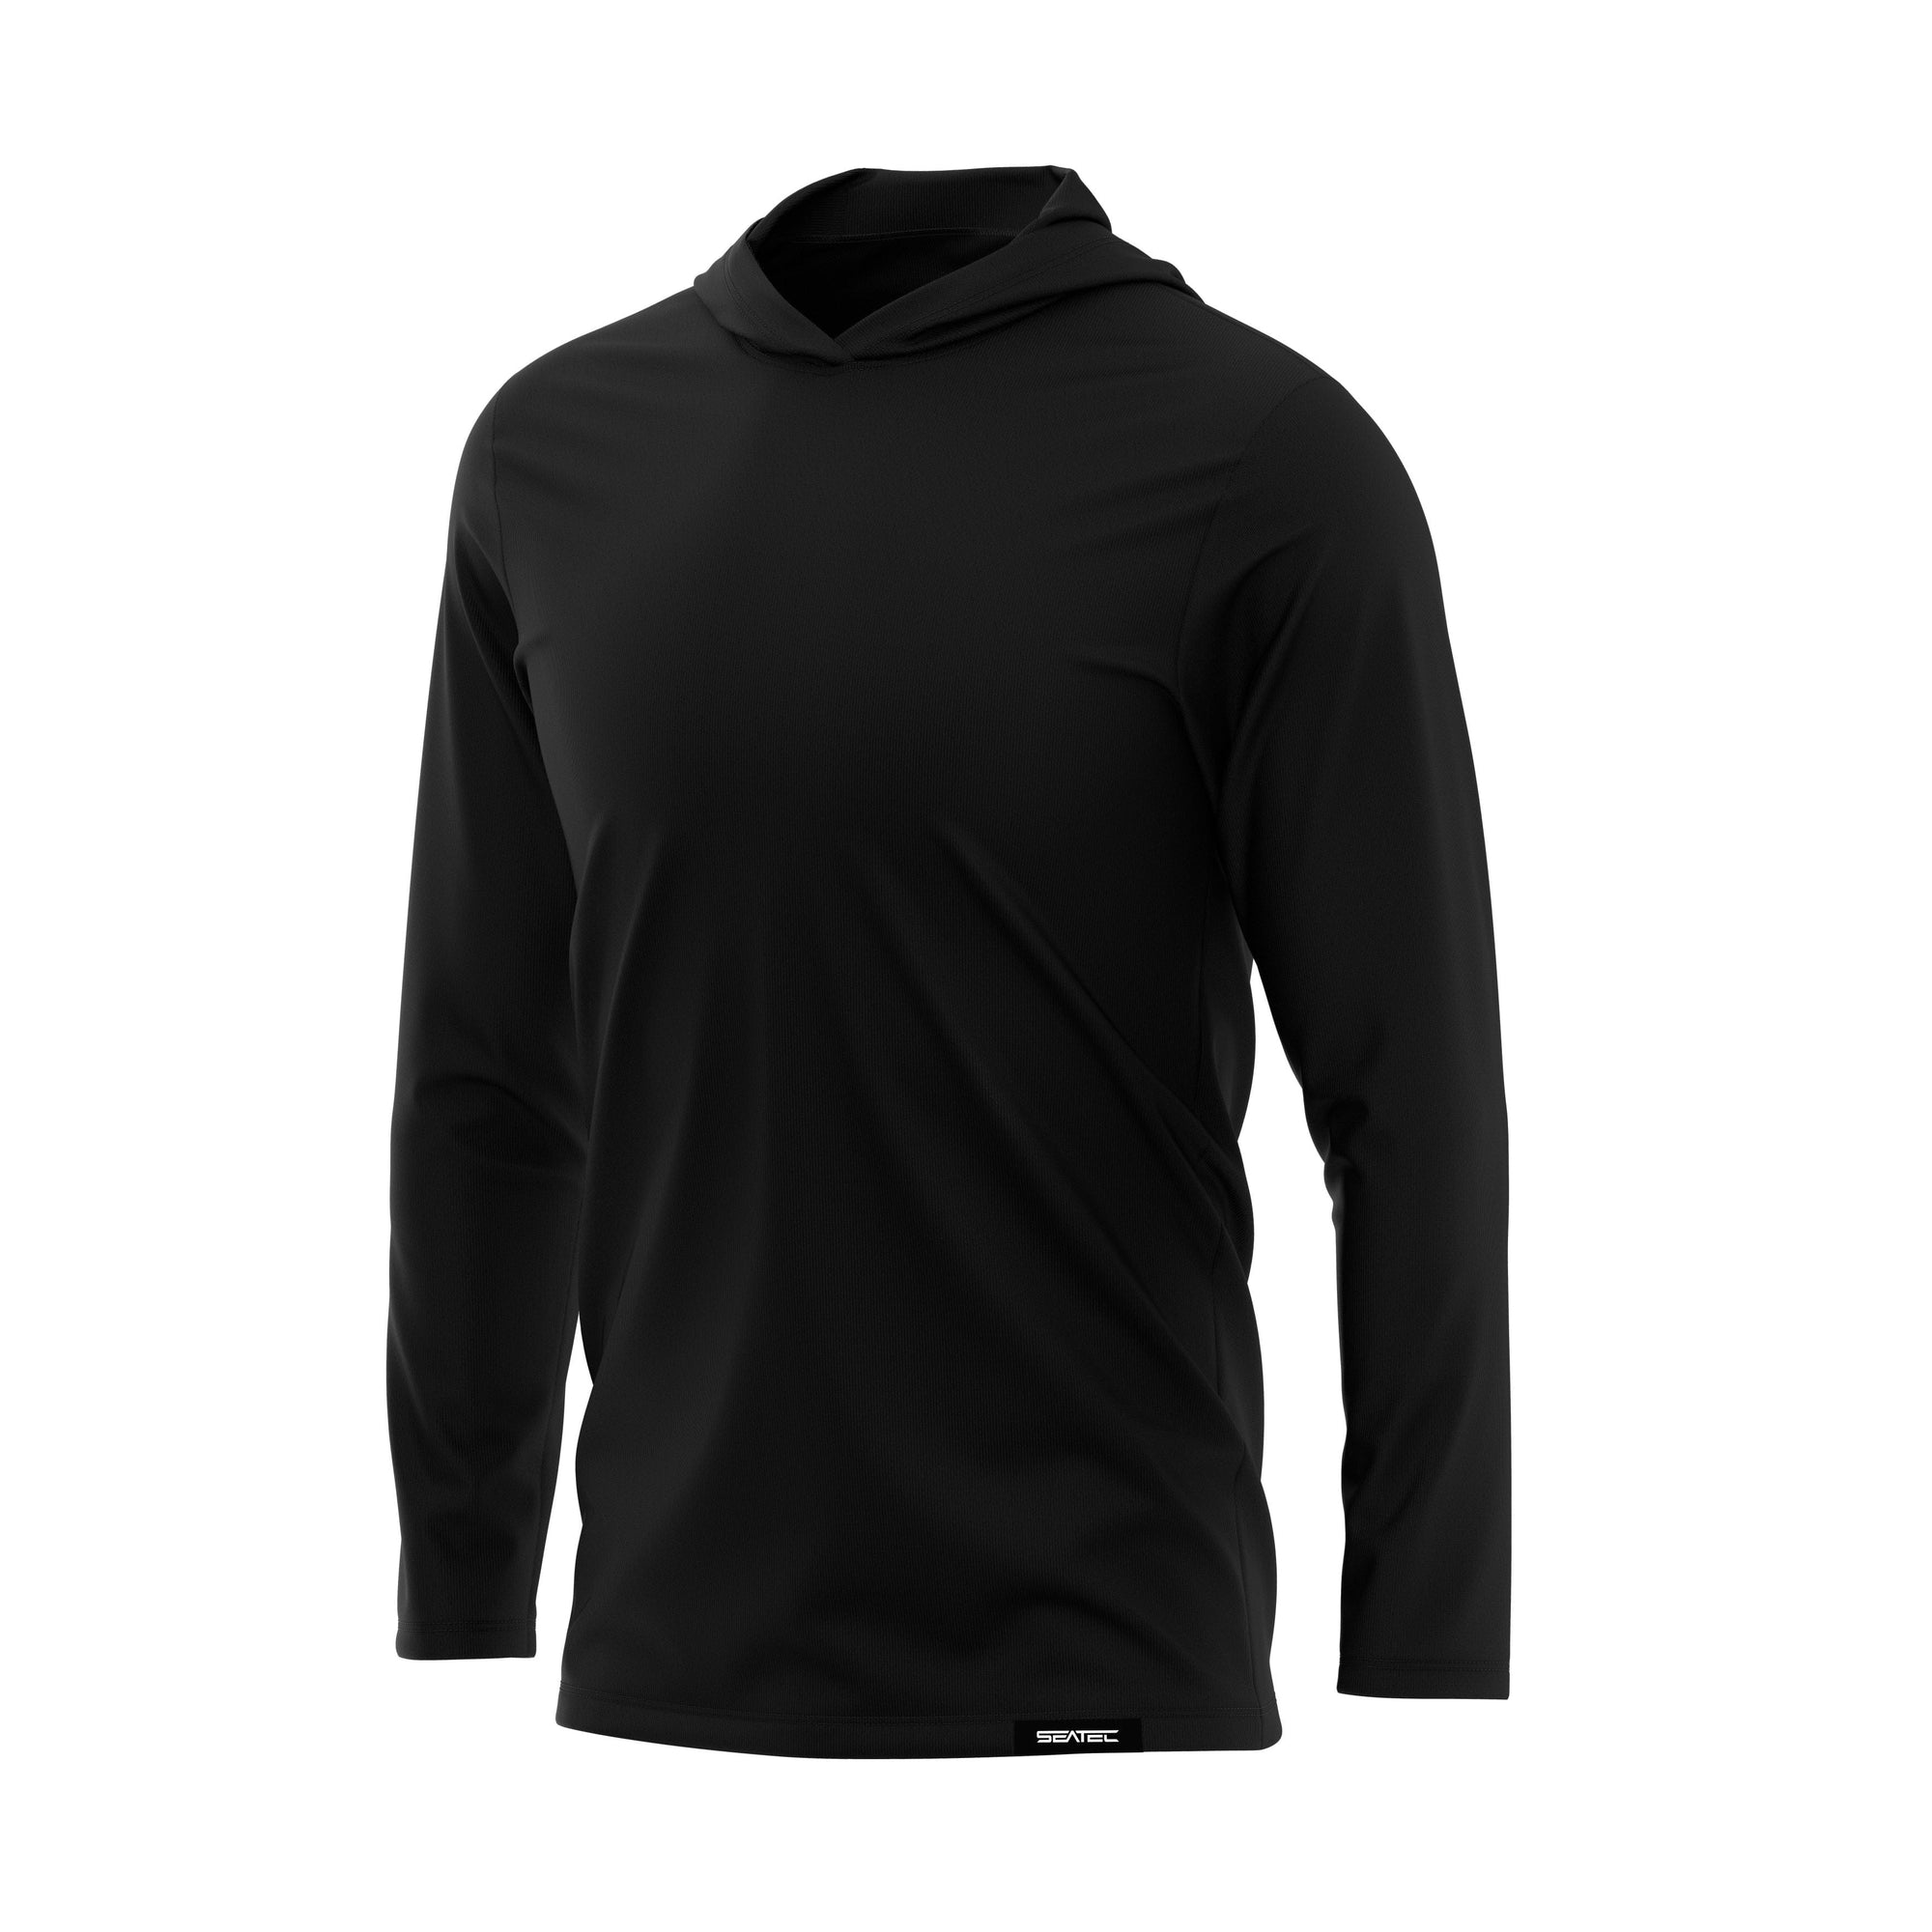 Seatec Outfitters Performance Shirts MEN'S ACTIVE | BLACK | LS HOODED